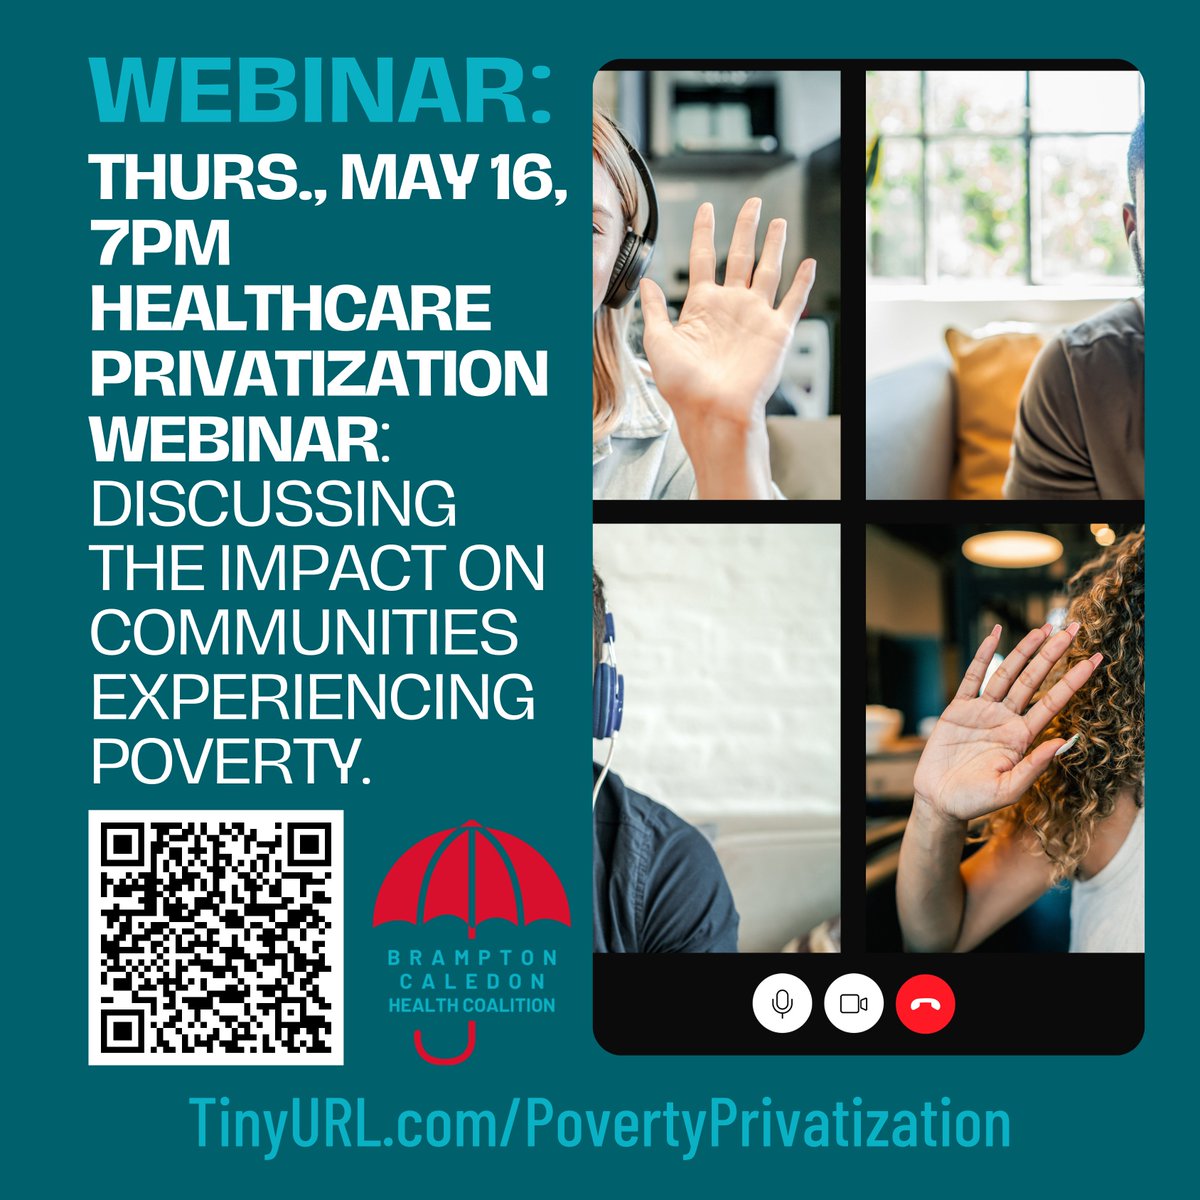 Register for our #Webinar to learn more about #HealthcarePrivatization and how it affects communities experiencing #poverty: tinyurl.com/PovertyPrivati…
#noprivatehospitals #healthcare #onhealth #universalhealthcare #dougford #onpoli #disability #unhoused #brampton #caledon #ontario